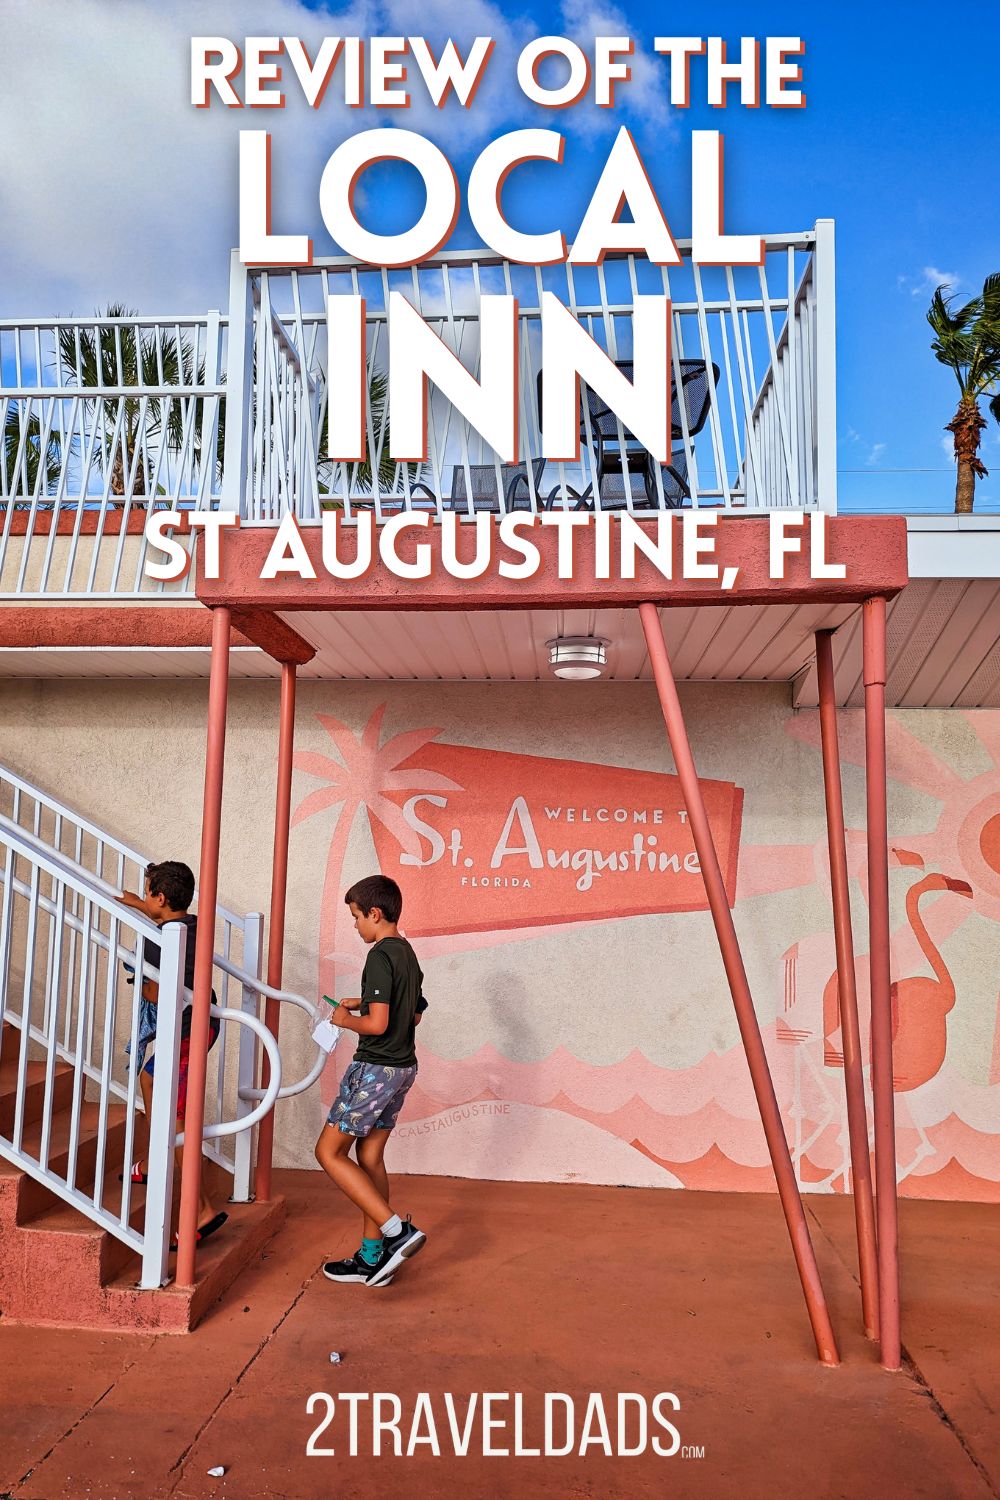 Review of the Local Inn St Augustine, Florida. Located on Anastasia Island, this vintage Florida roadside motel is a fun, comfortable and budget friendly hotel in St Augustine close to the beach and downtown.